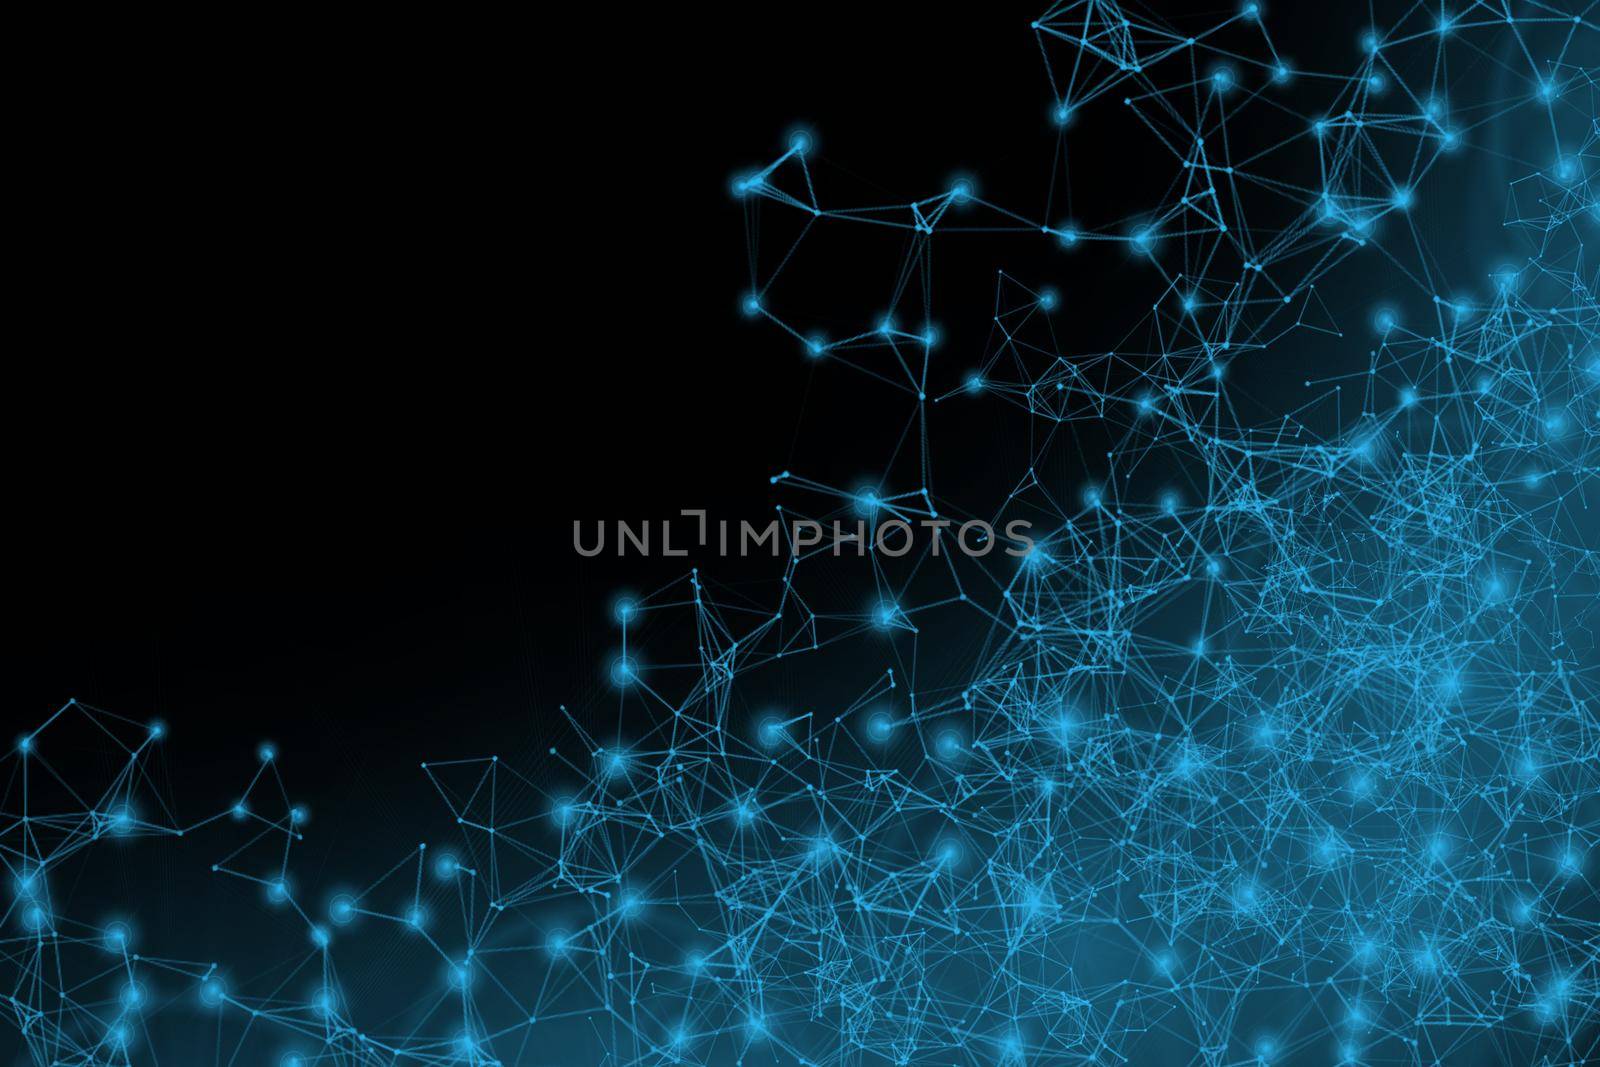 abstract geometrical background with lines and dots for futuristic concept. abstract, abstract backgrounds, blue backgrounds, Abstract polygonal background with connecting dots and lines of plexus effect. Connection technology background or digital background. Big data visualization. Science Network connection structure.